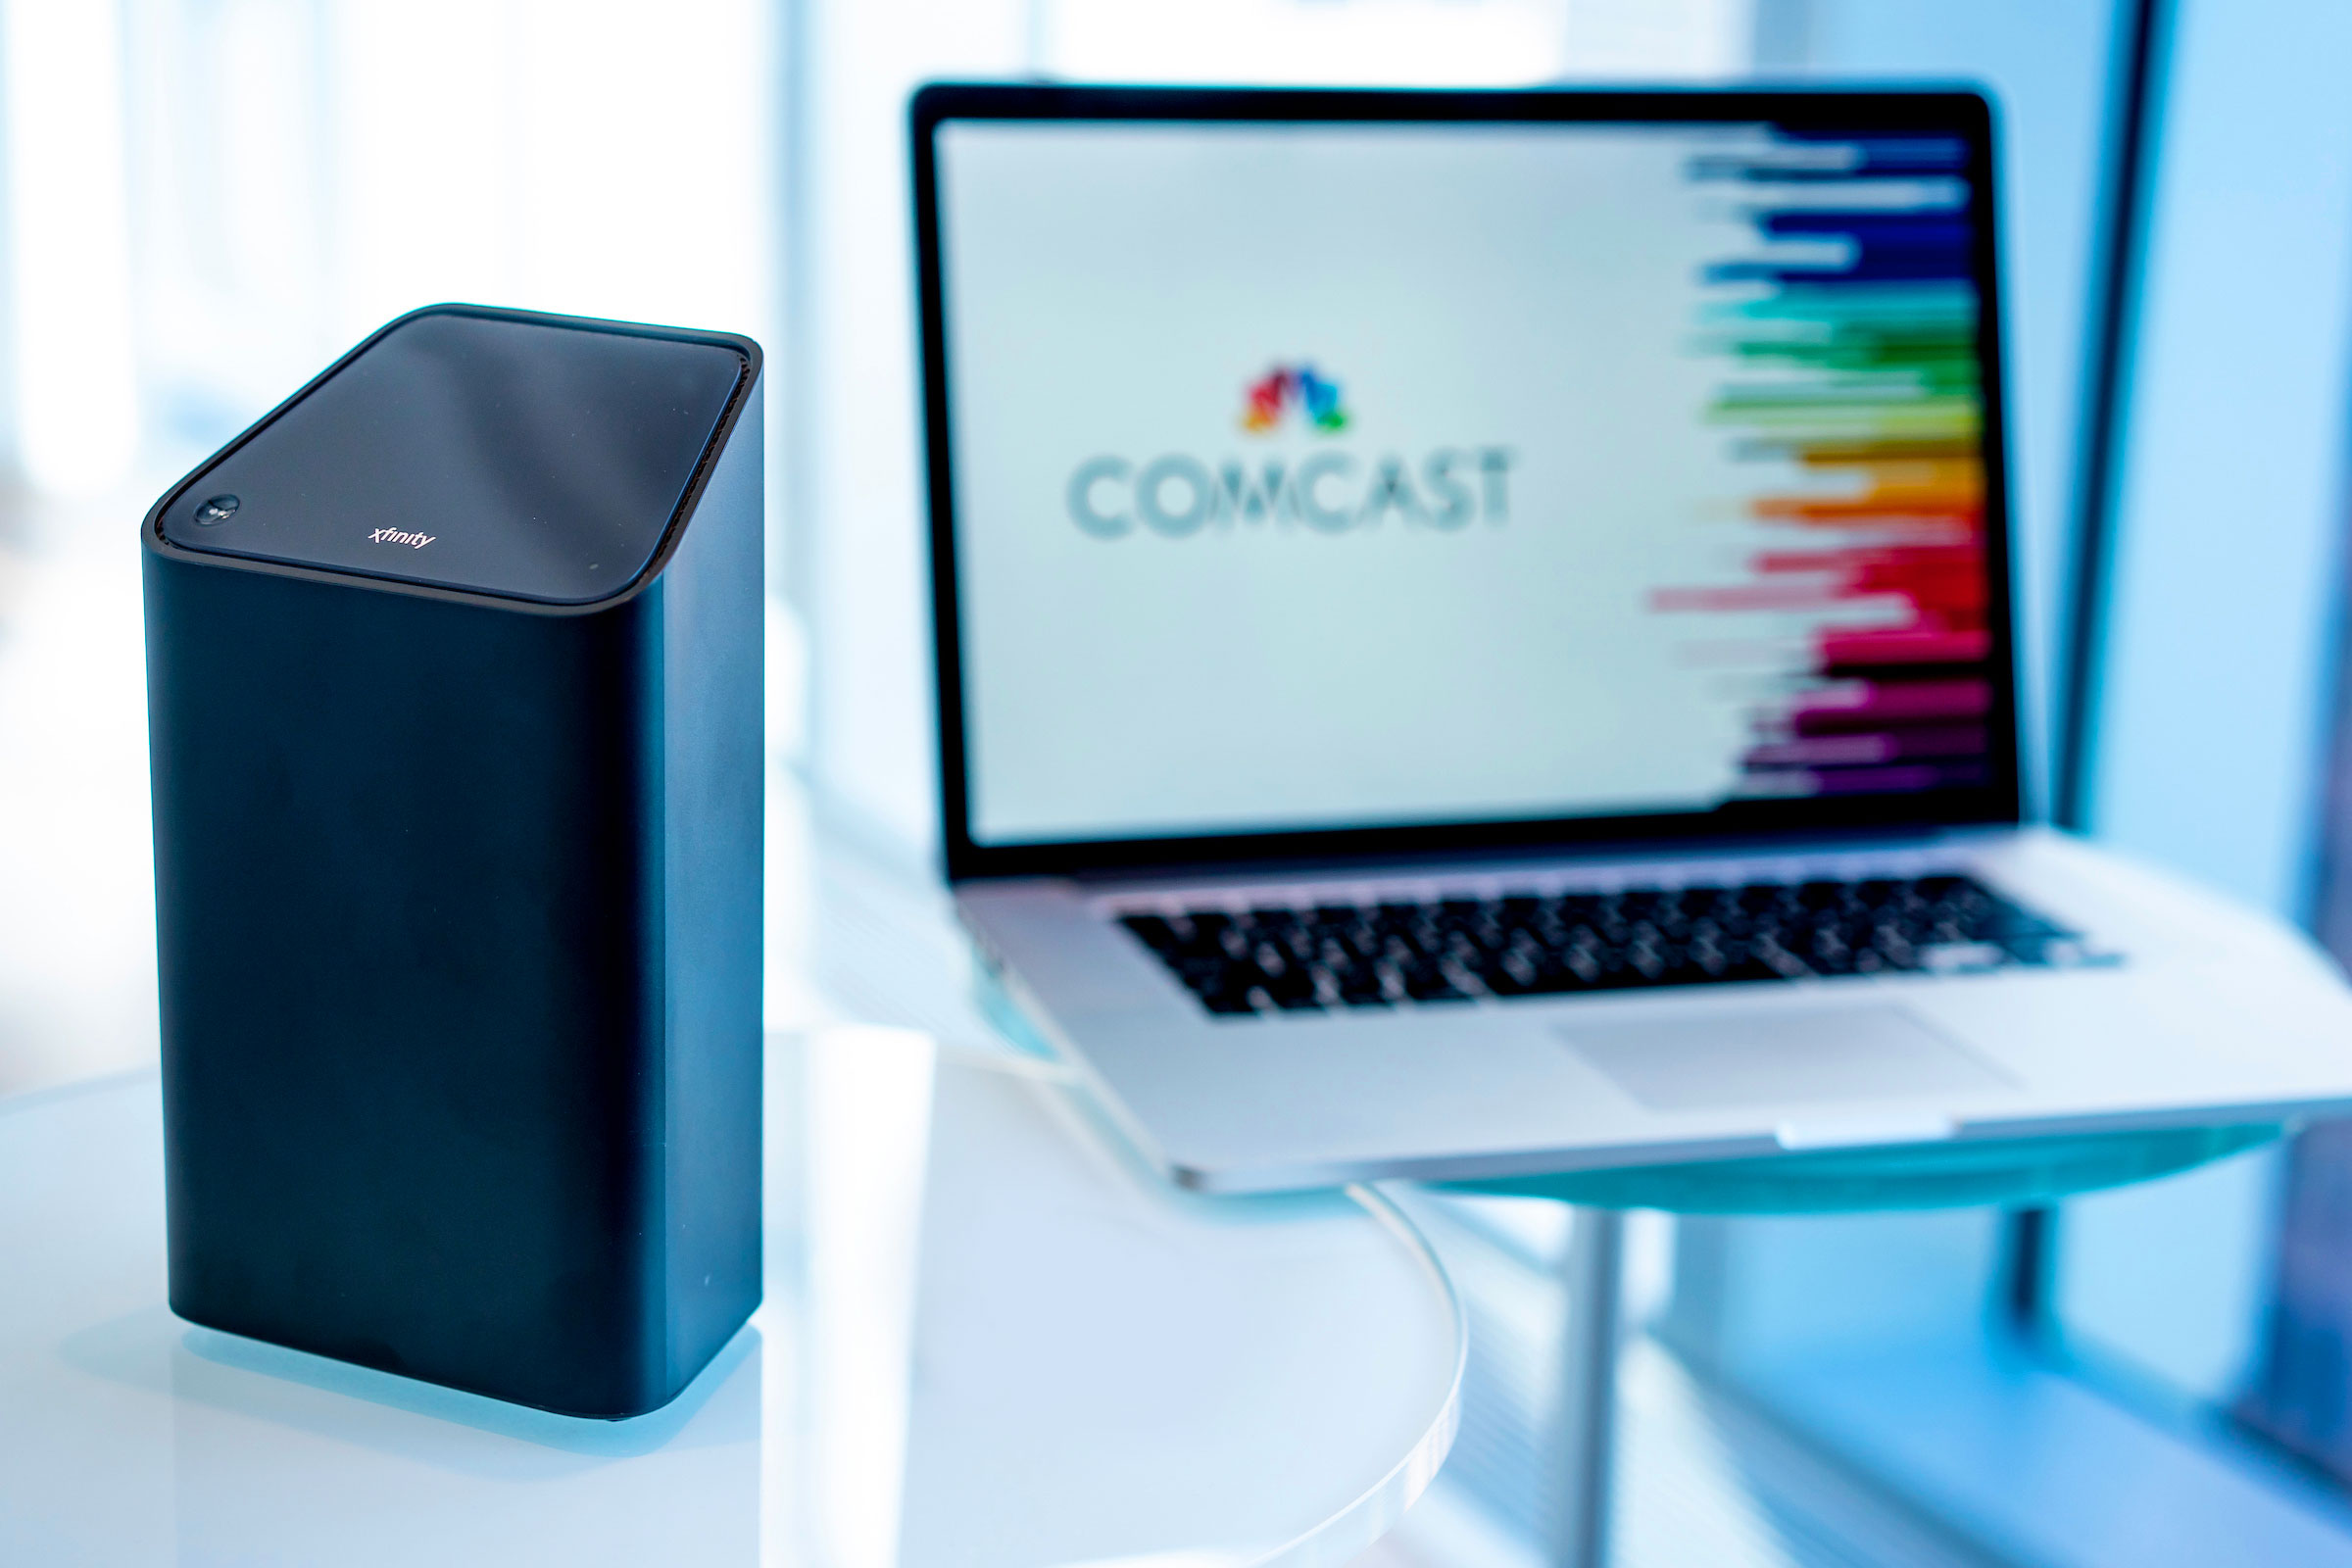 comcast packages